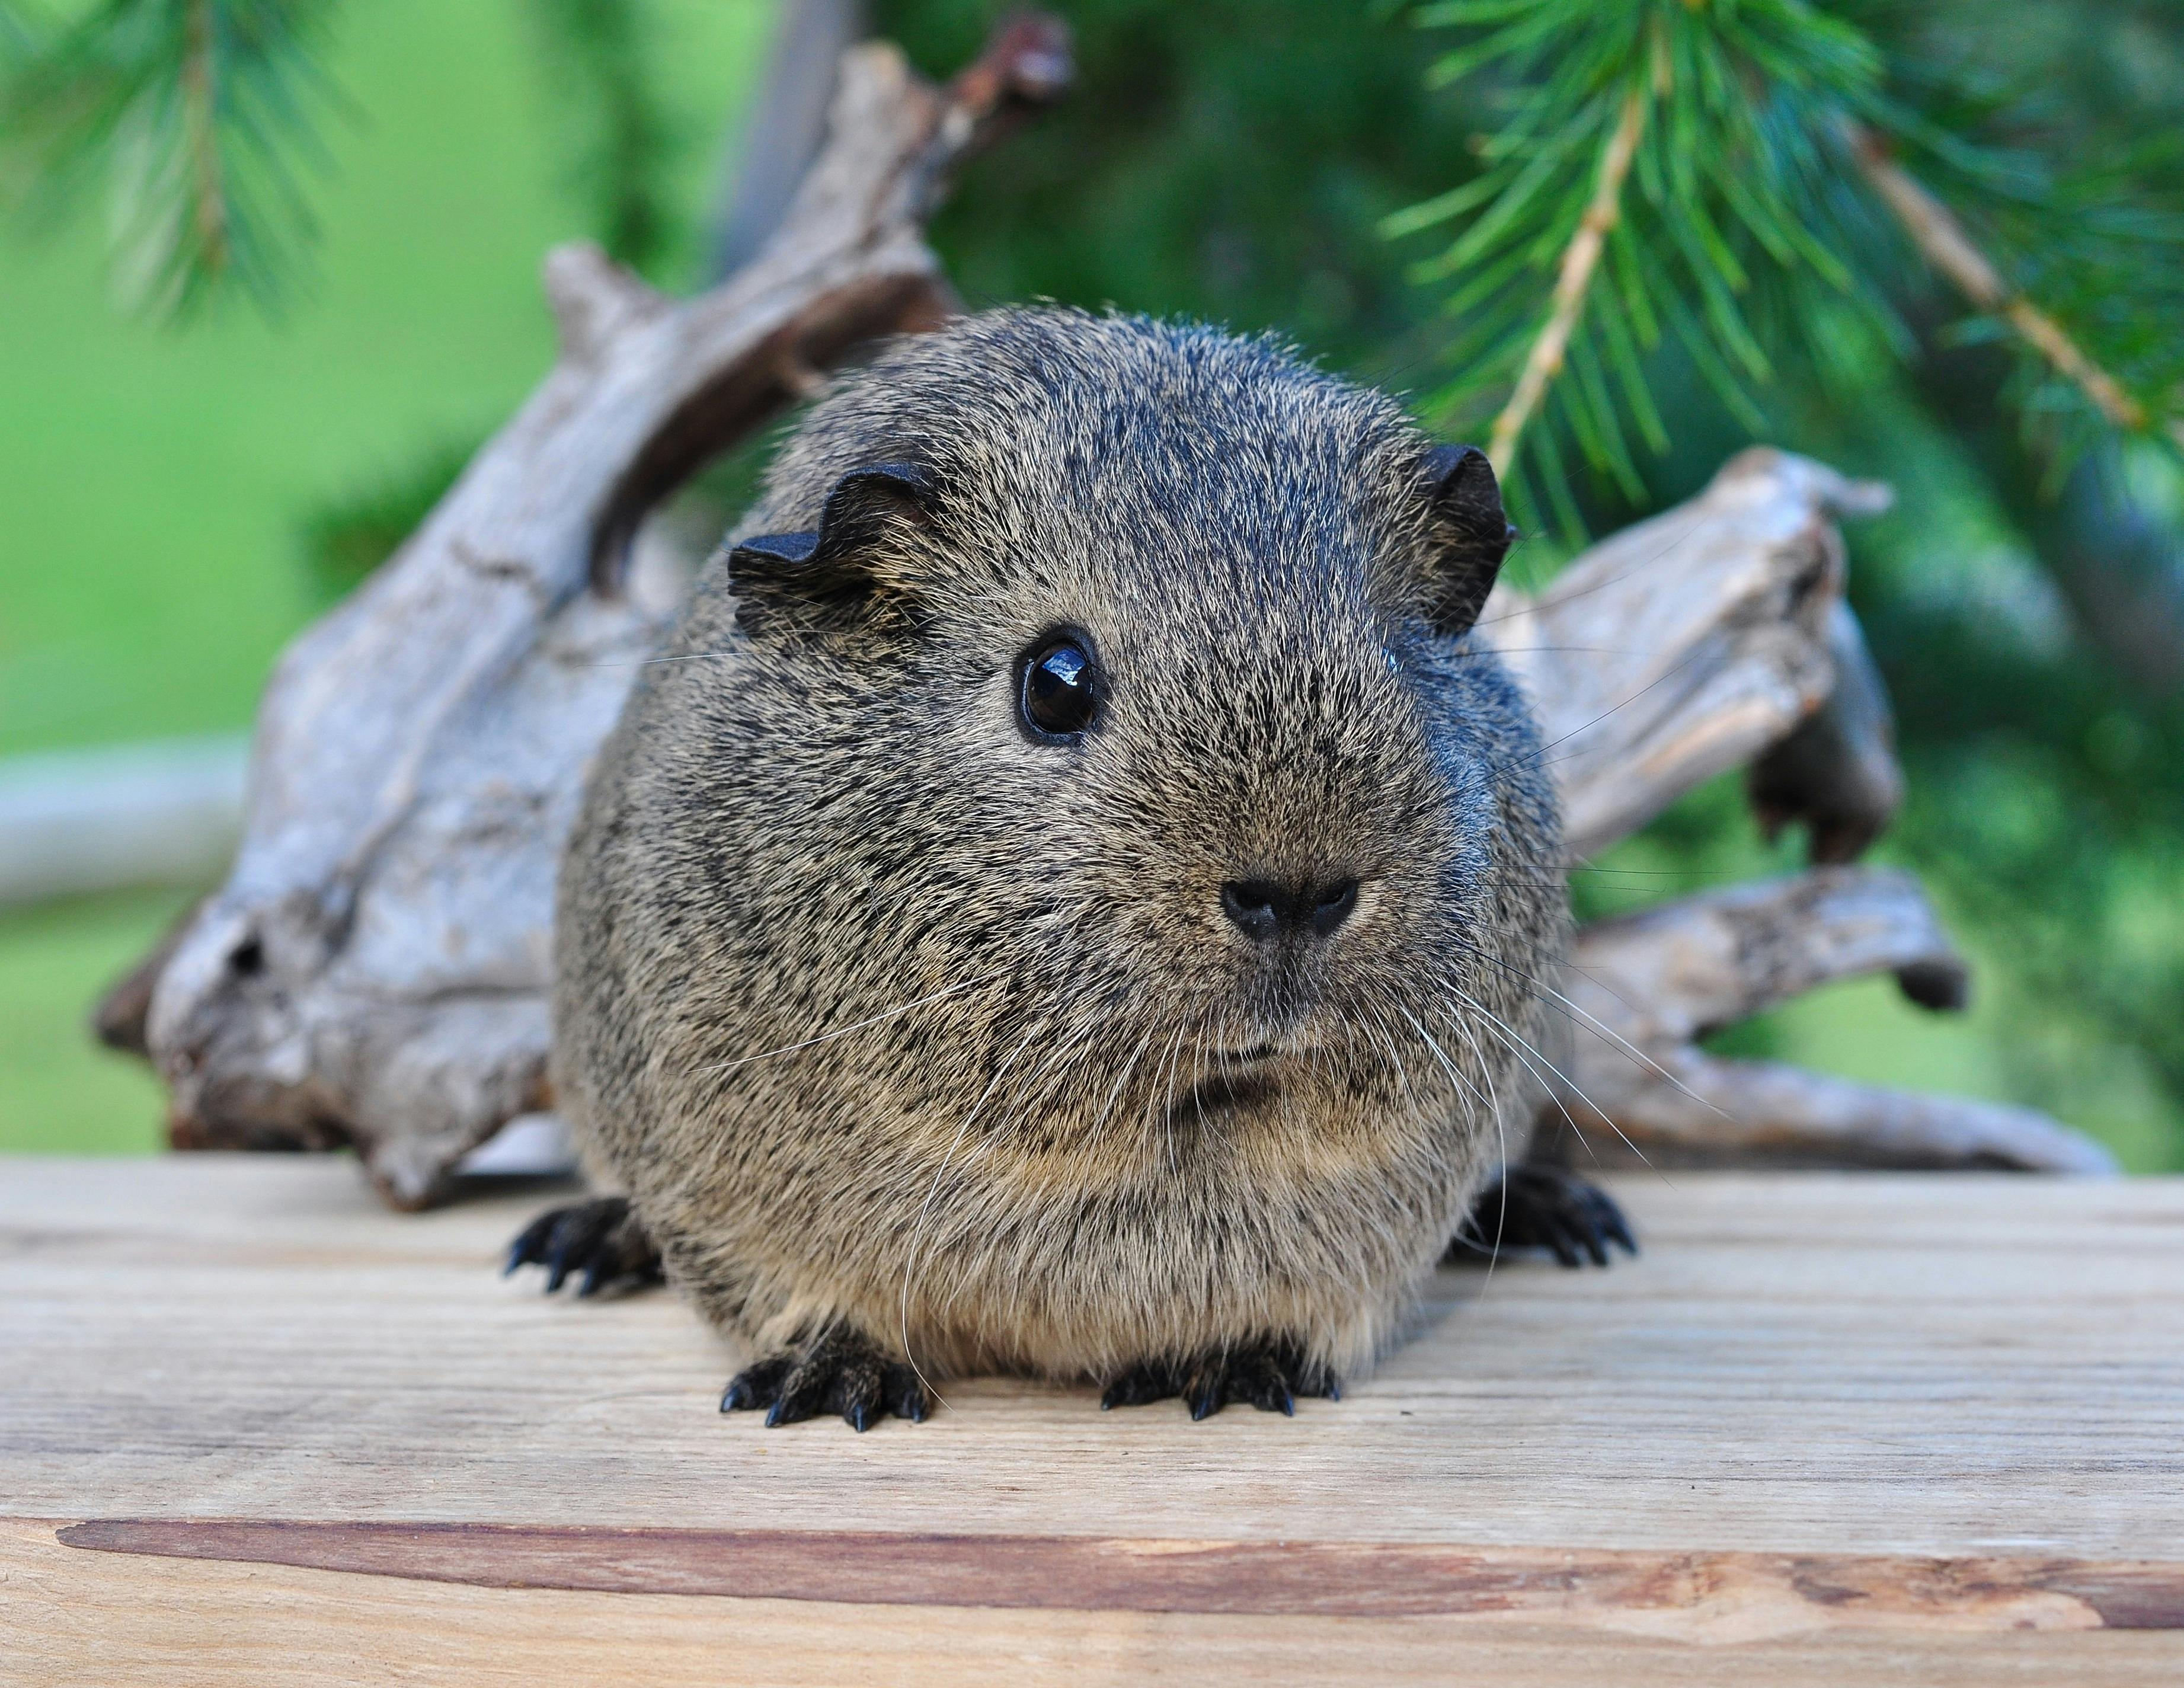 Brown Guinea Pig With Yellow Leaves on Top · Free Stock Photo